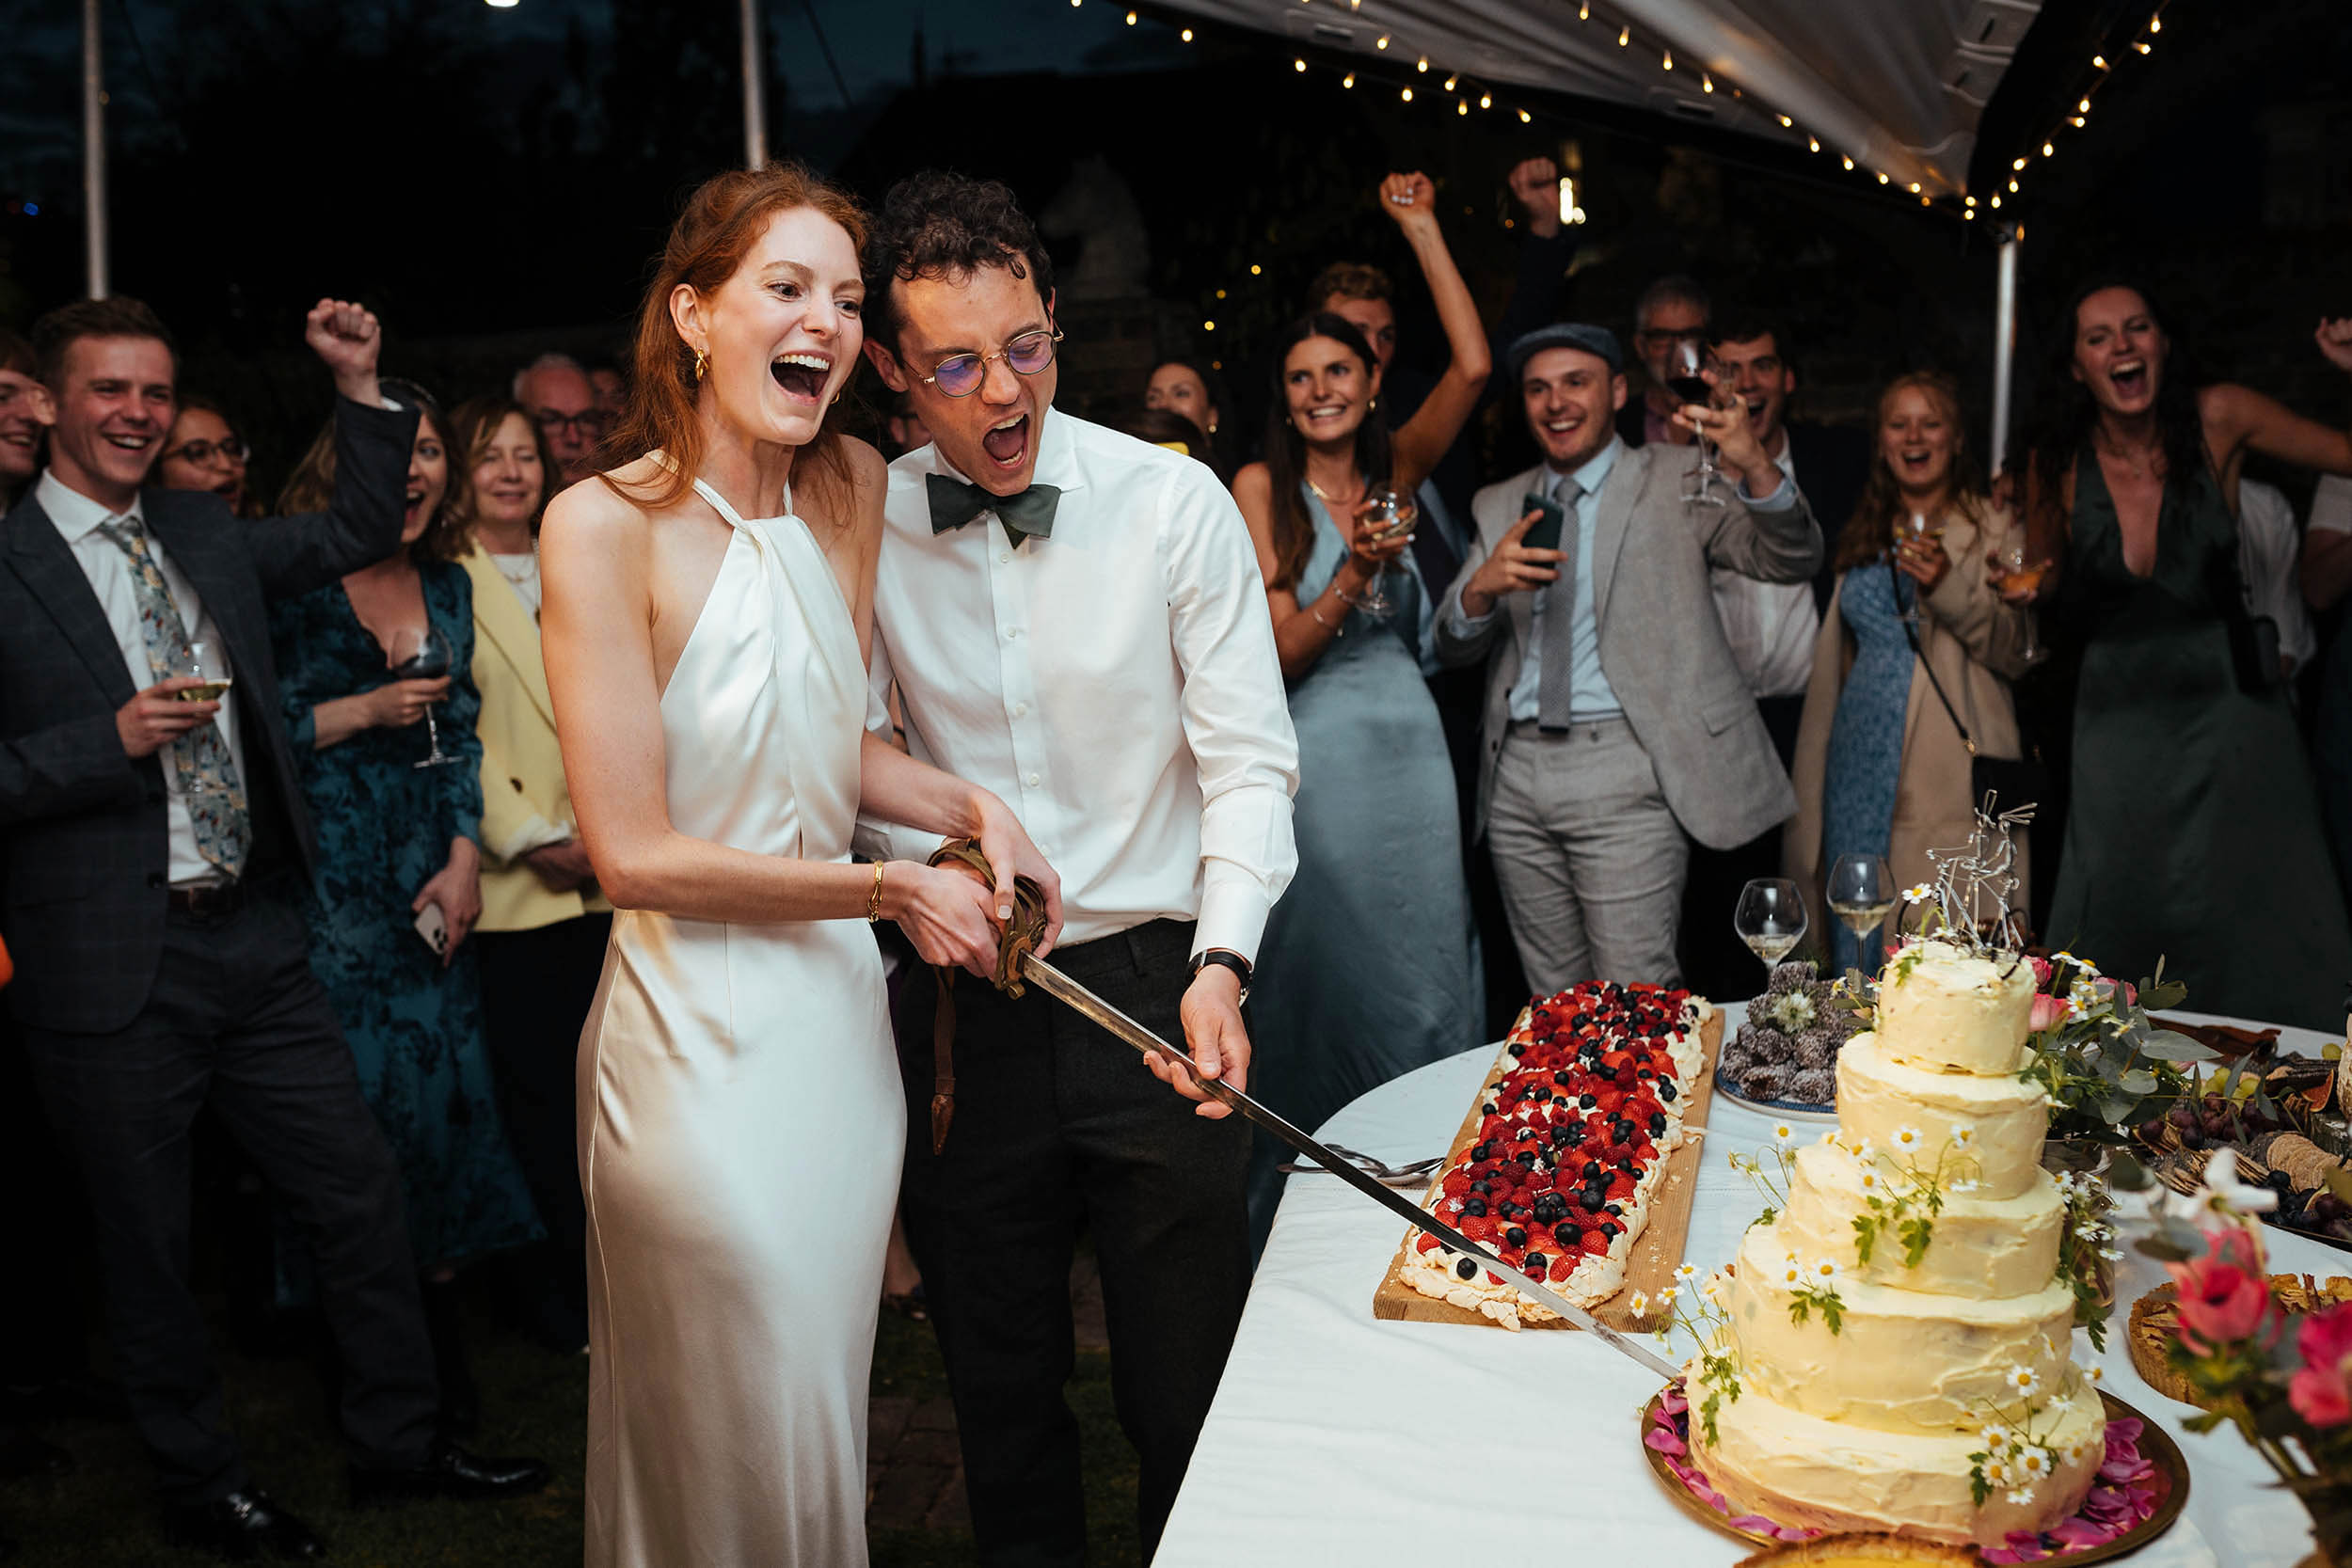 32_wedding_day_cutting_the_cake_reportage_style_photographer_london